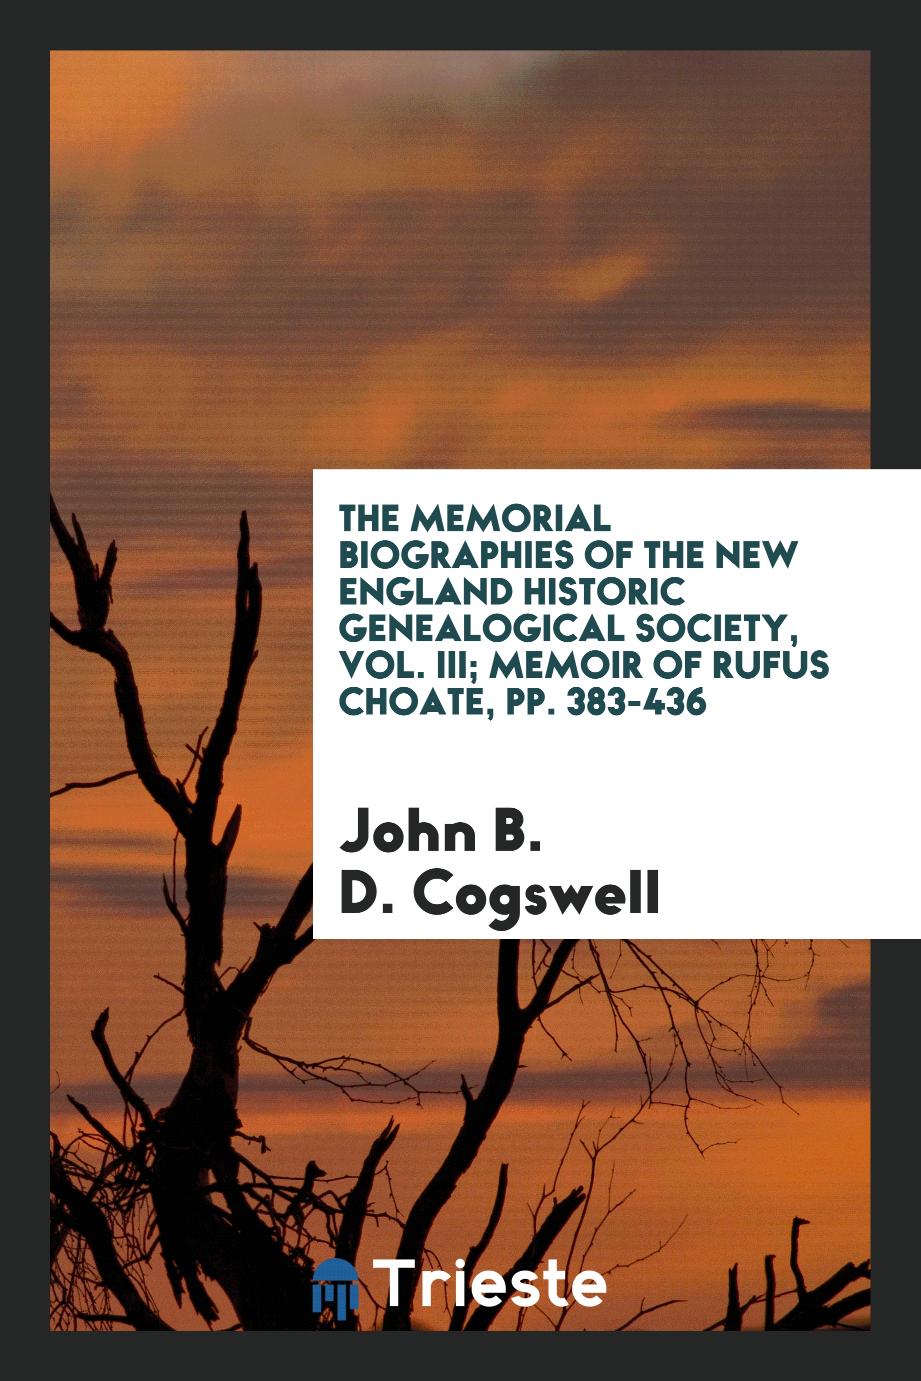 The Memorial Biographies of the New England Historic Genealogical Society, Vol. III; Memoir of Rufus Choate, pp. 383-436